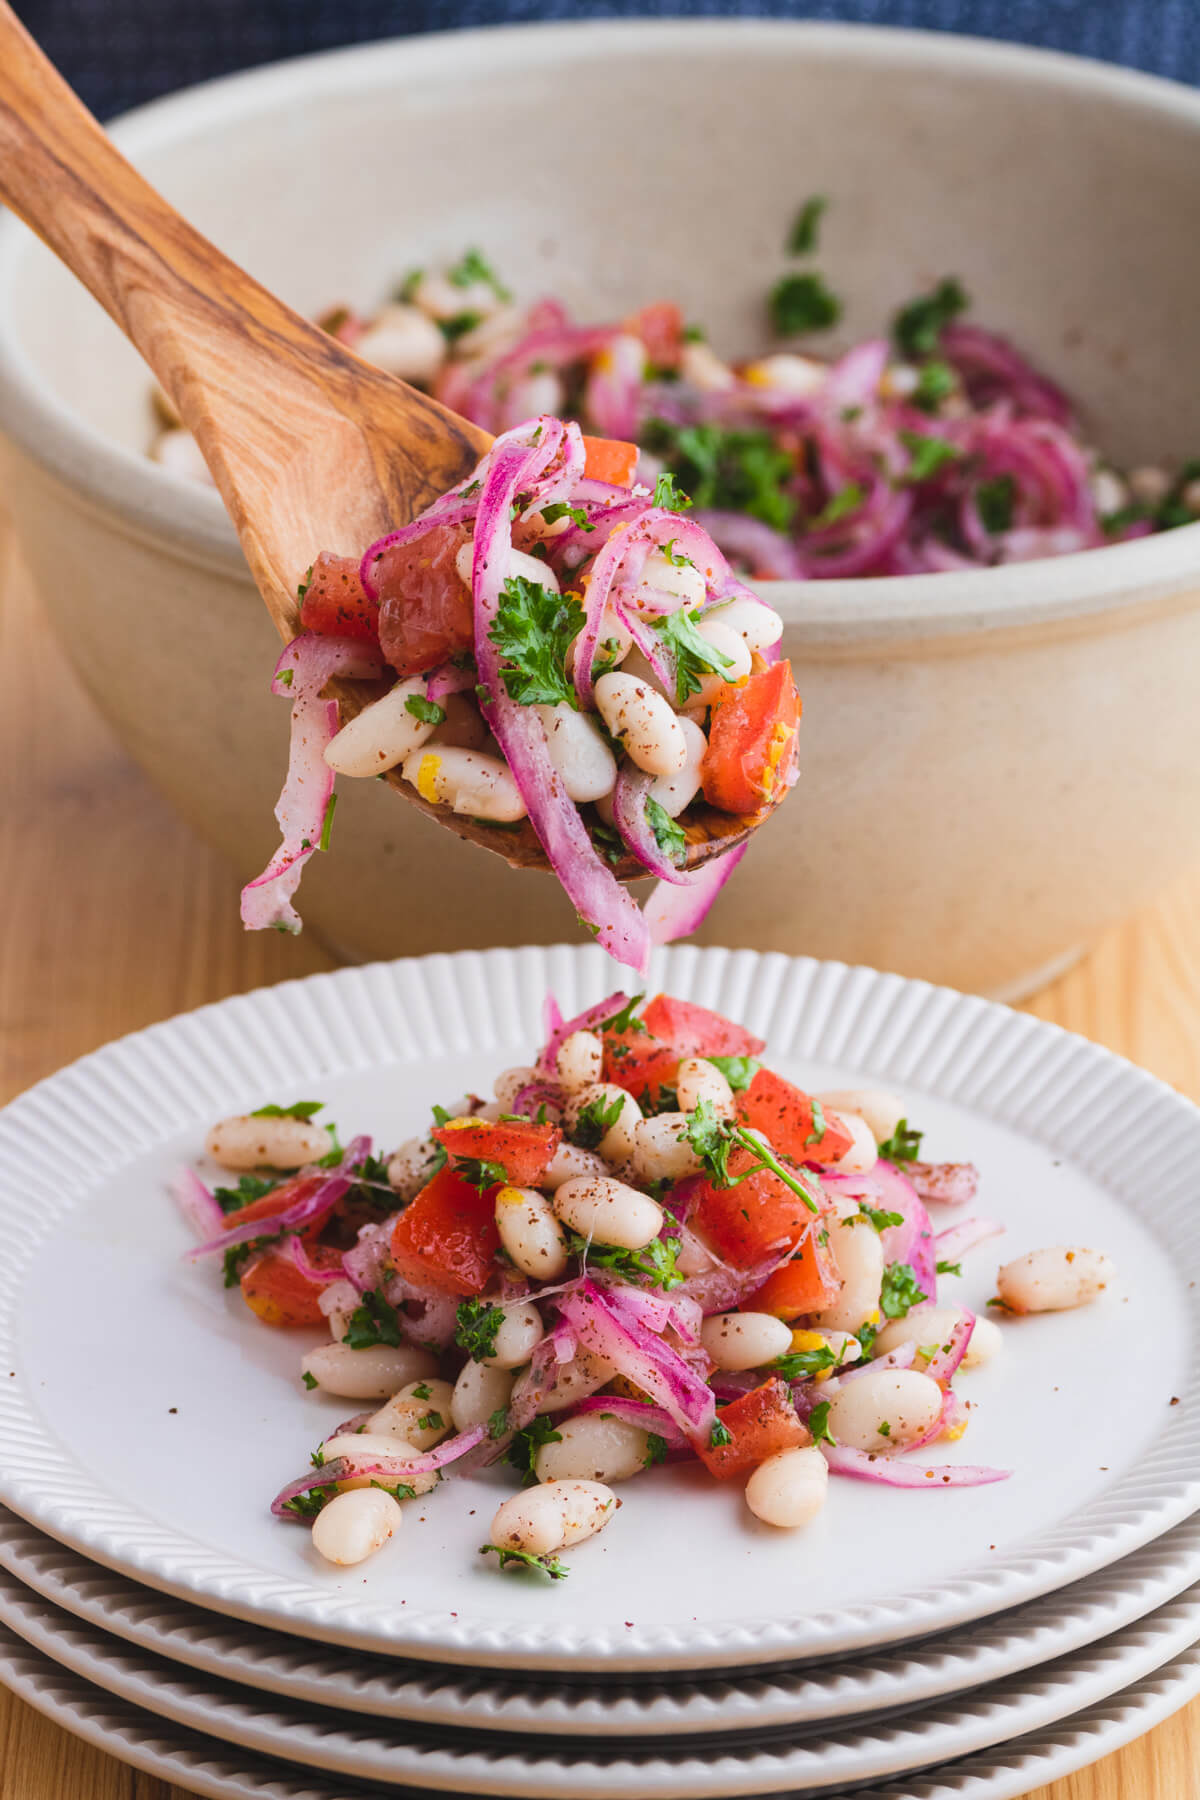 A wooden spoon serves a colourful white bean salad with red onions, tomatoes, and green curly parsley onto a white plate.